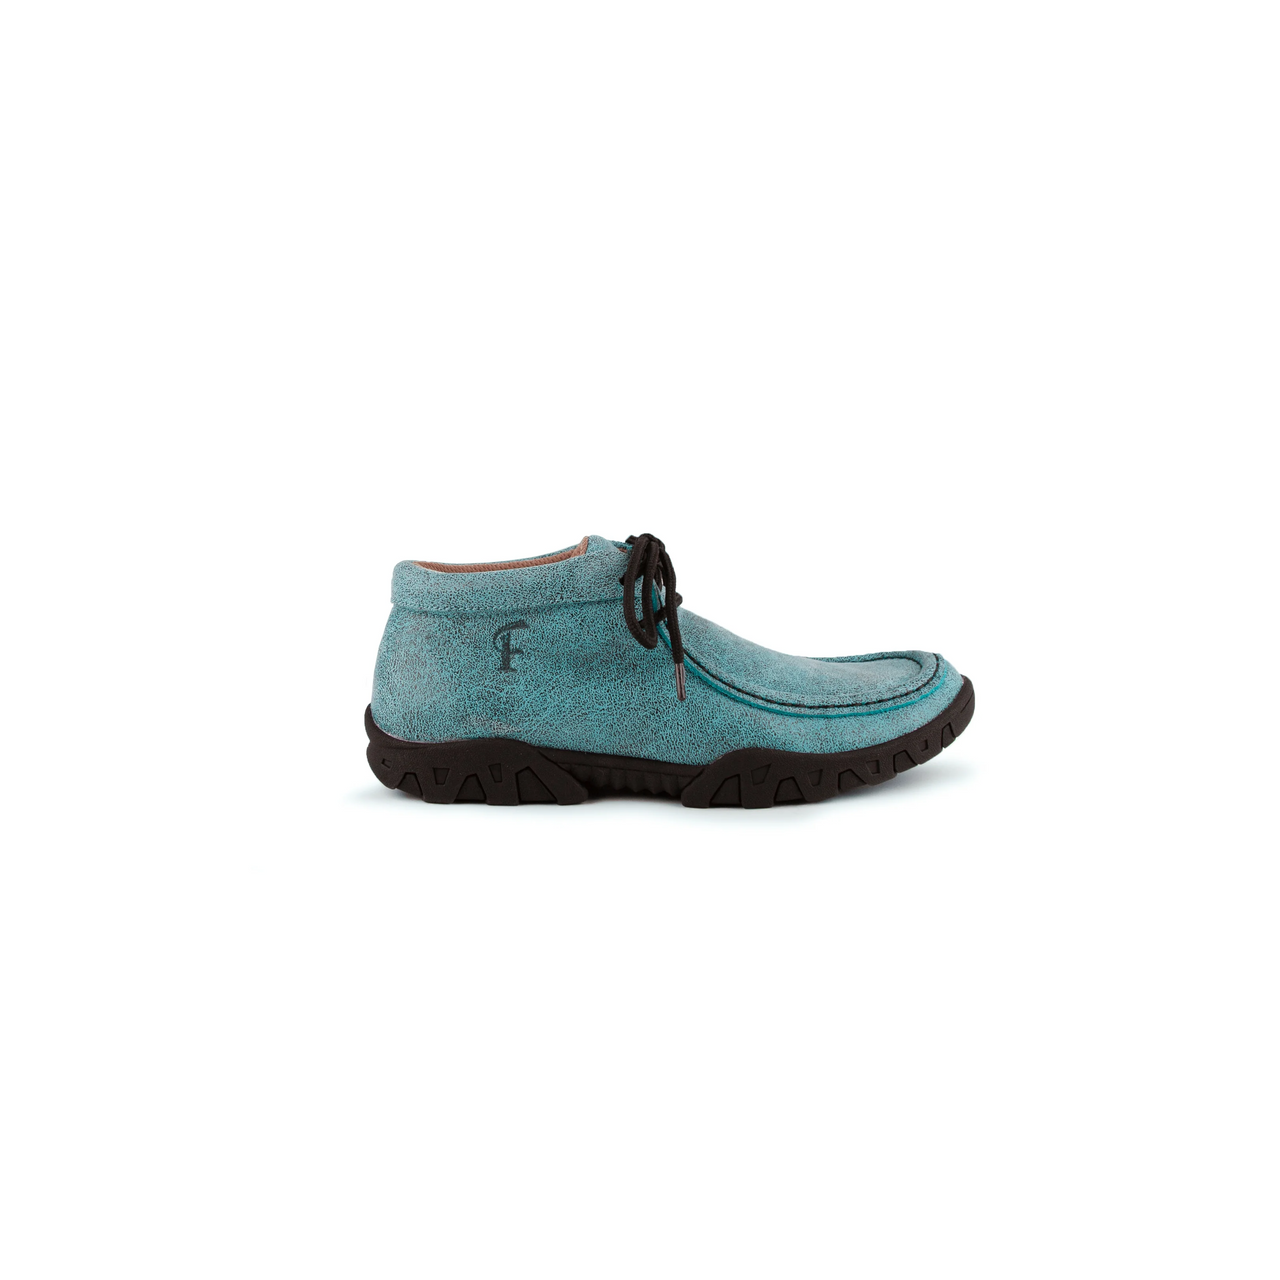 Ferrini Womens Rogue Casual Shoes - Turquoise